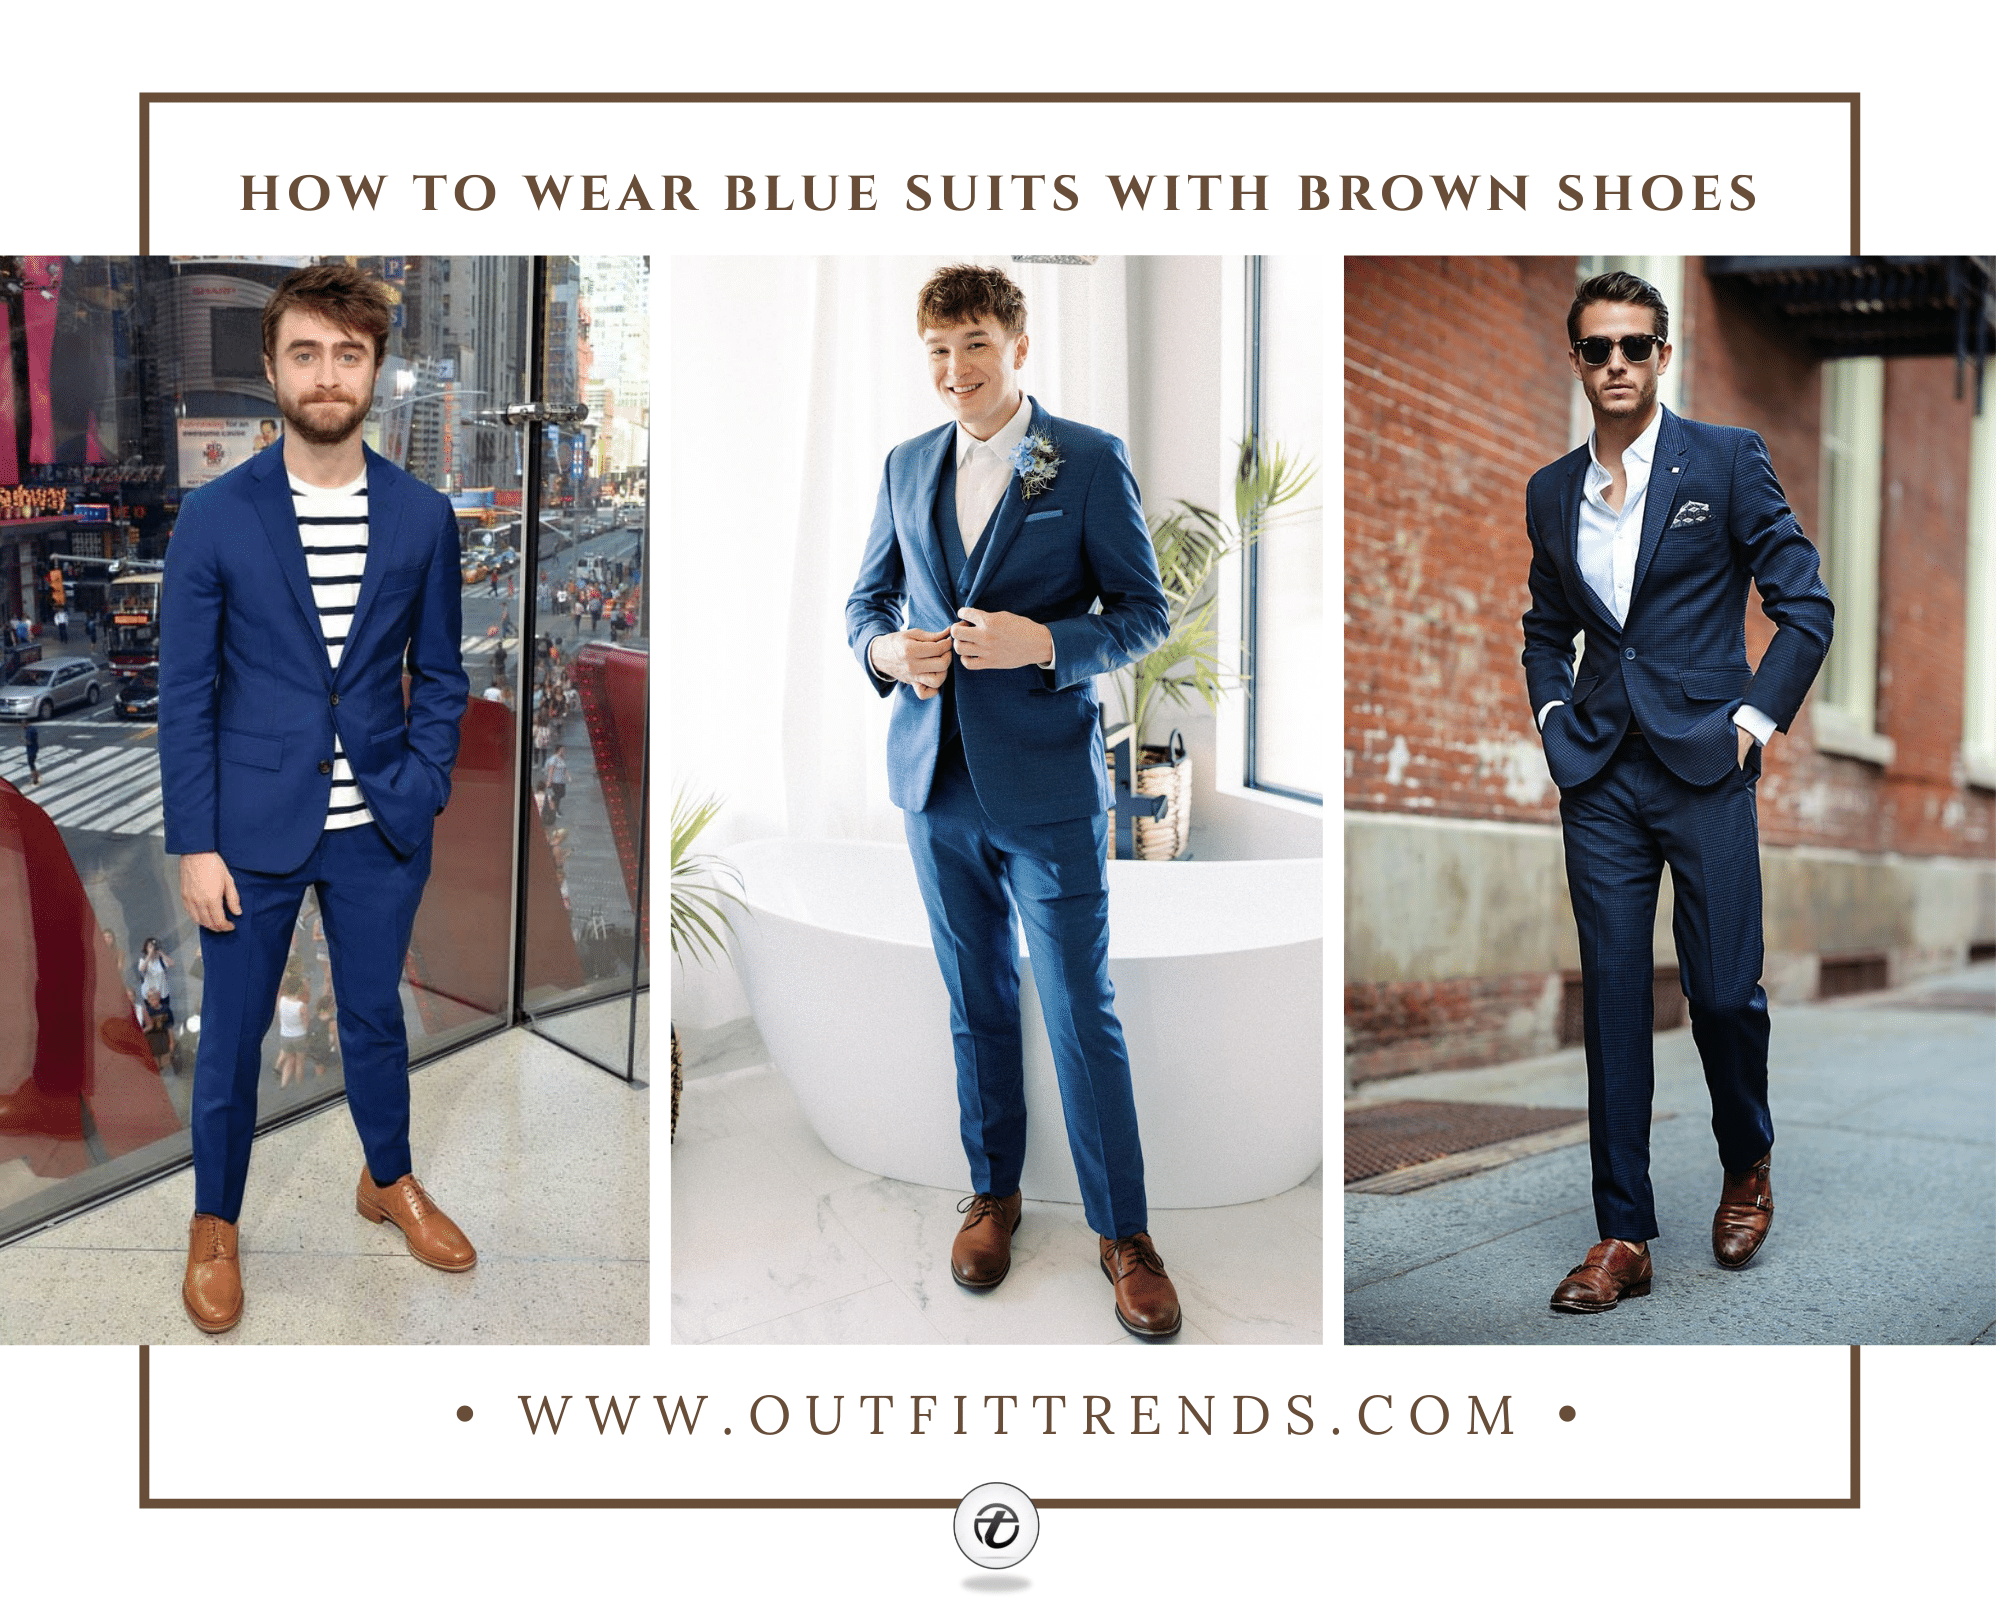 What type of shoes should I wear with a royal blue suit? - Quora